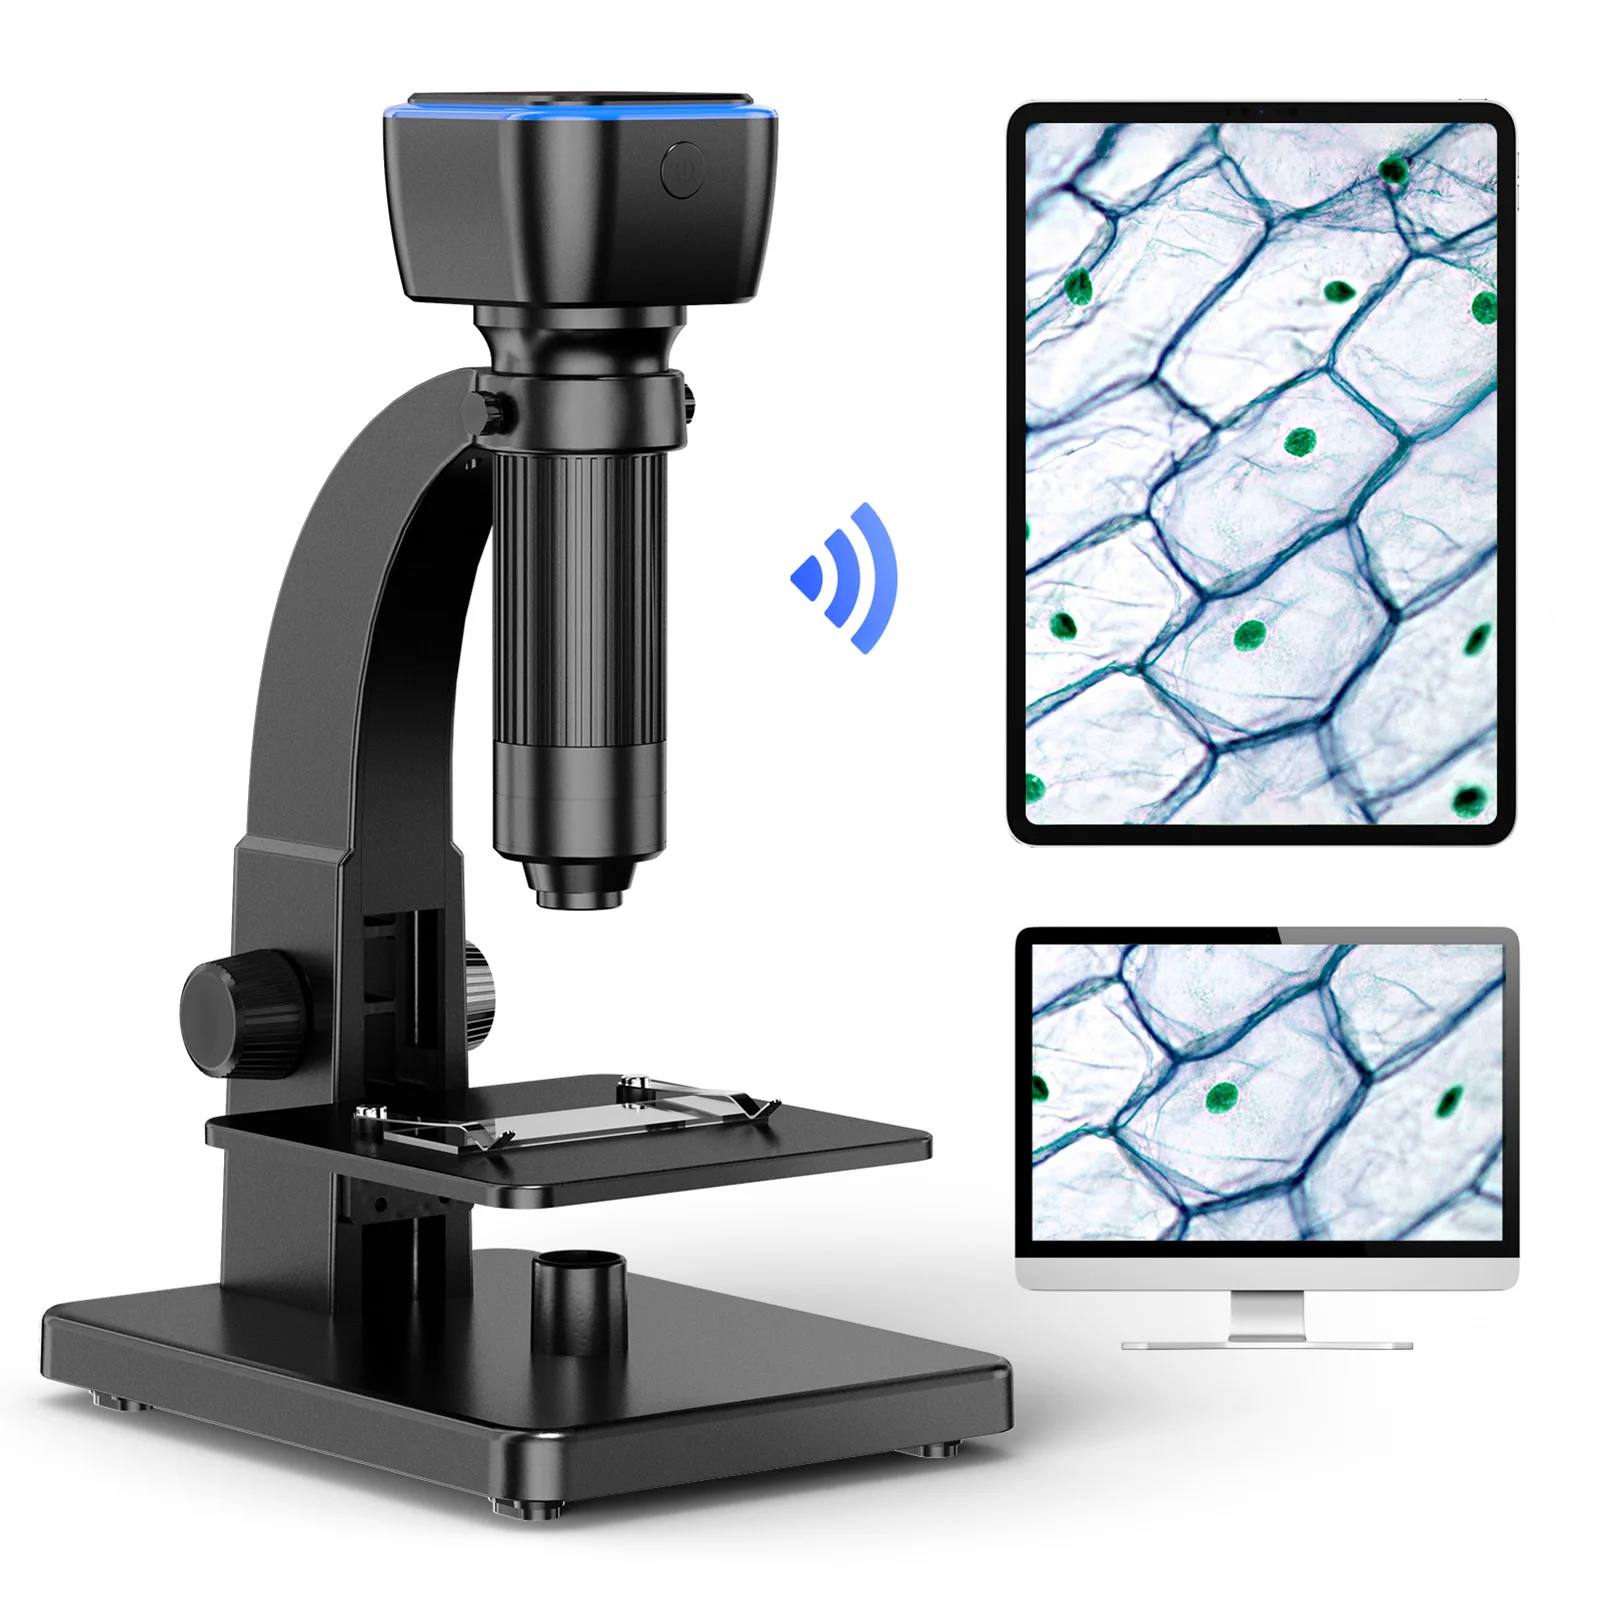 

2000x Magnification Dual Lenses Intelligent Digital Microscope USB Rechargeable 5.0M Pixels High Clear PC & WI-FI-Connection